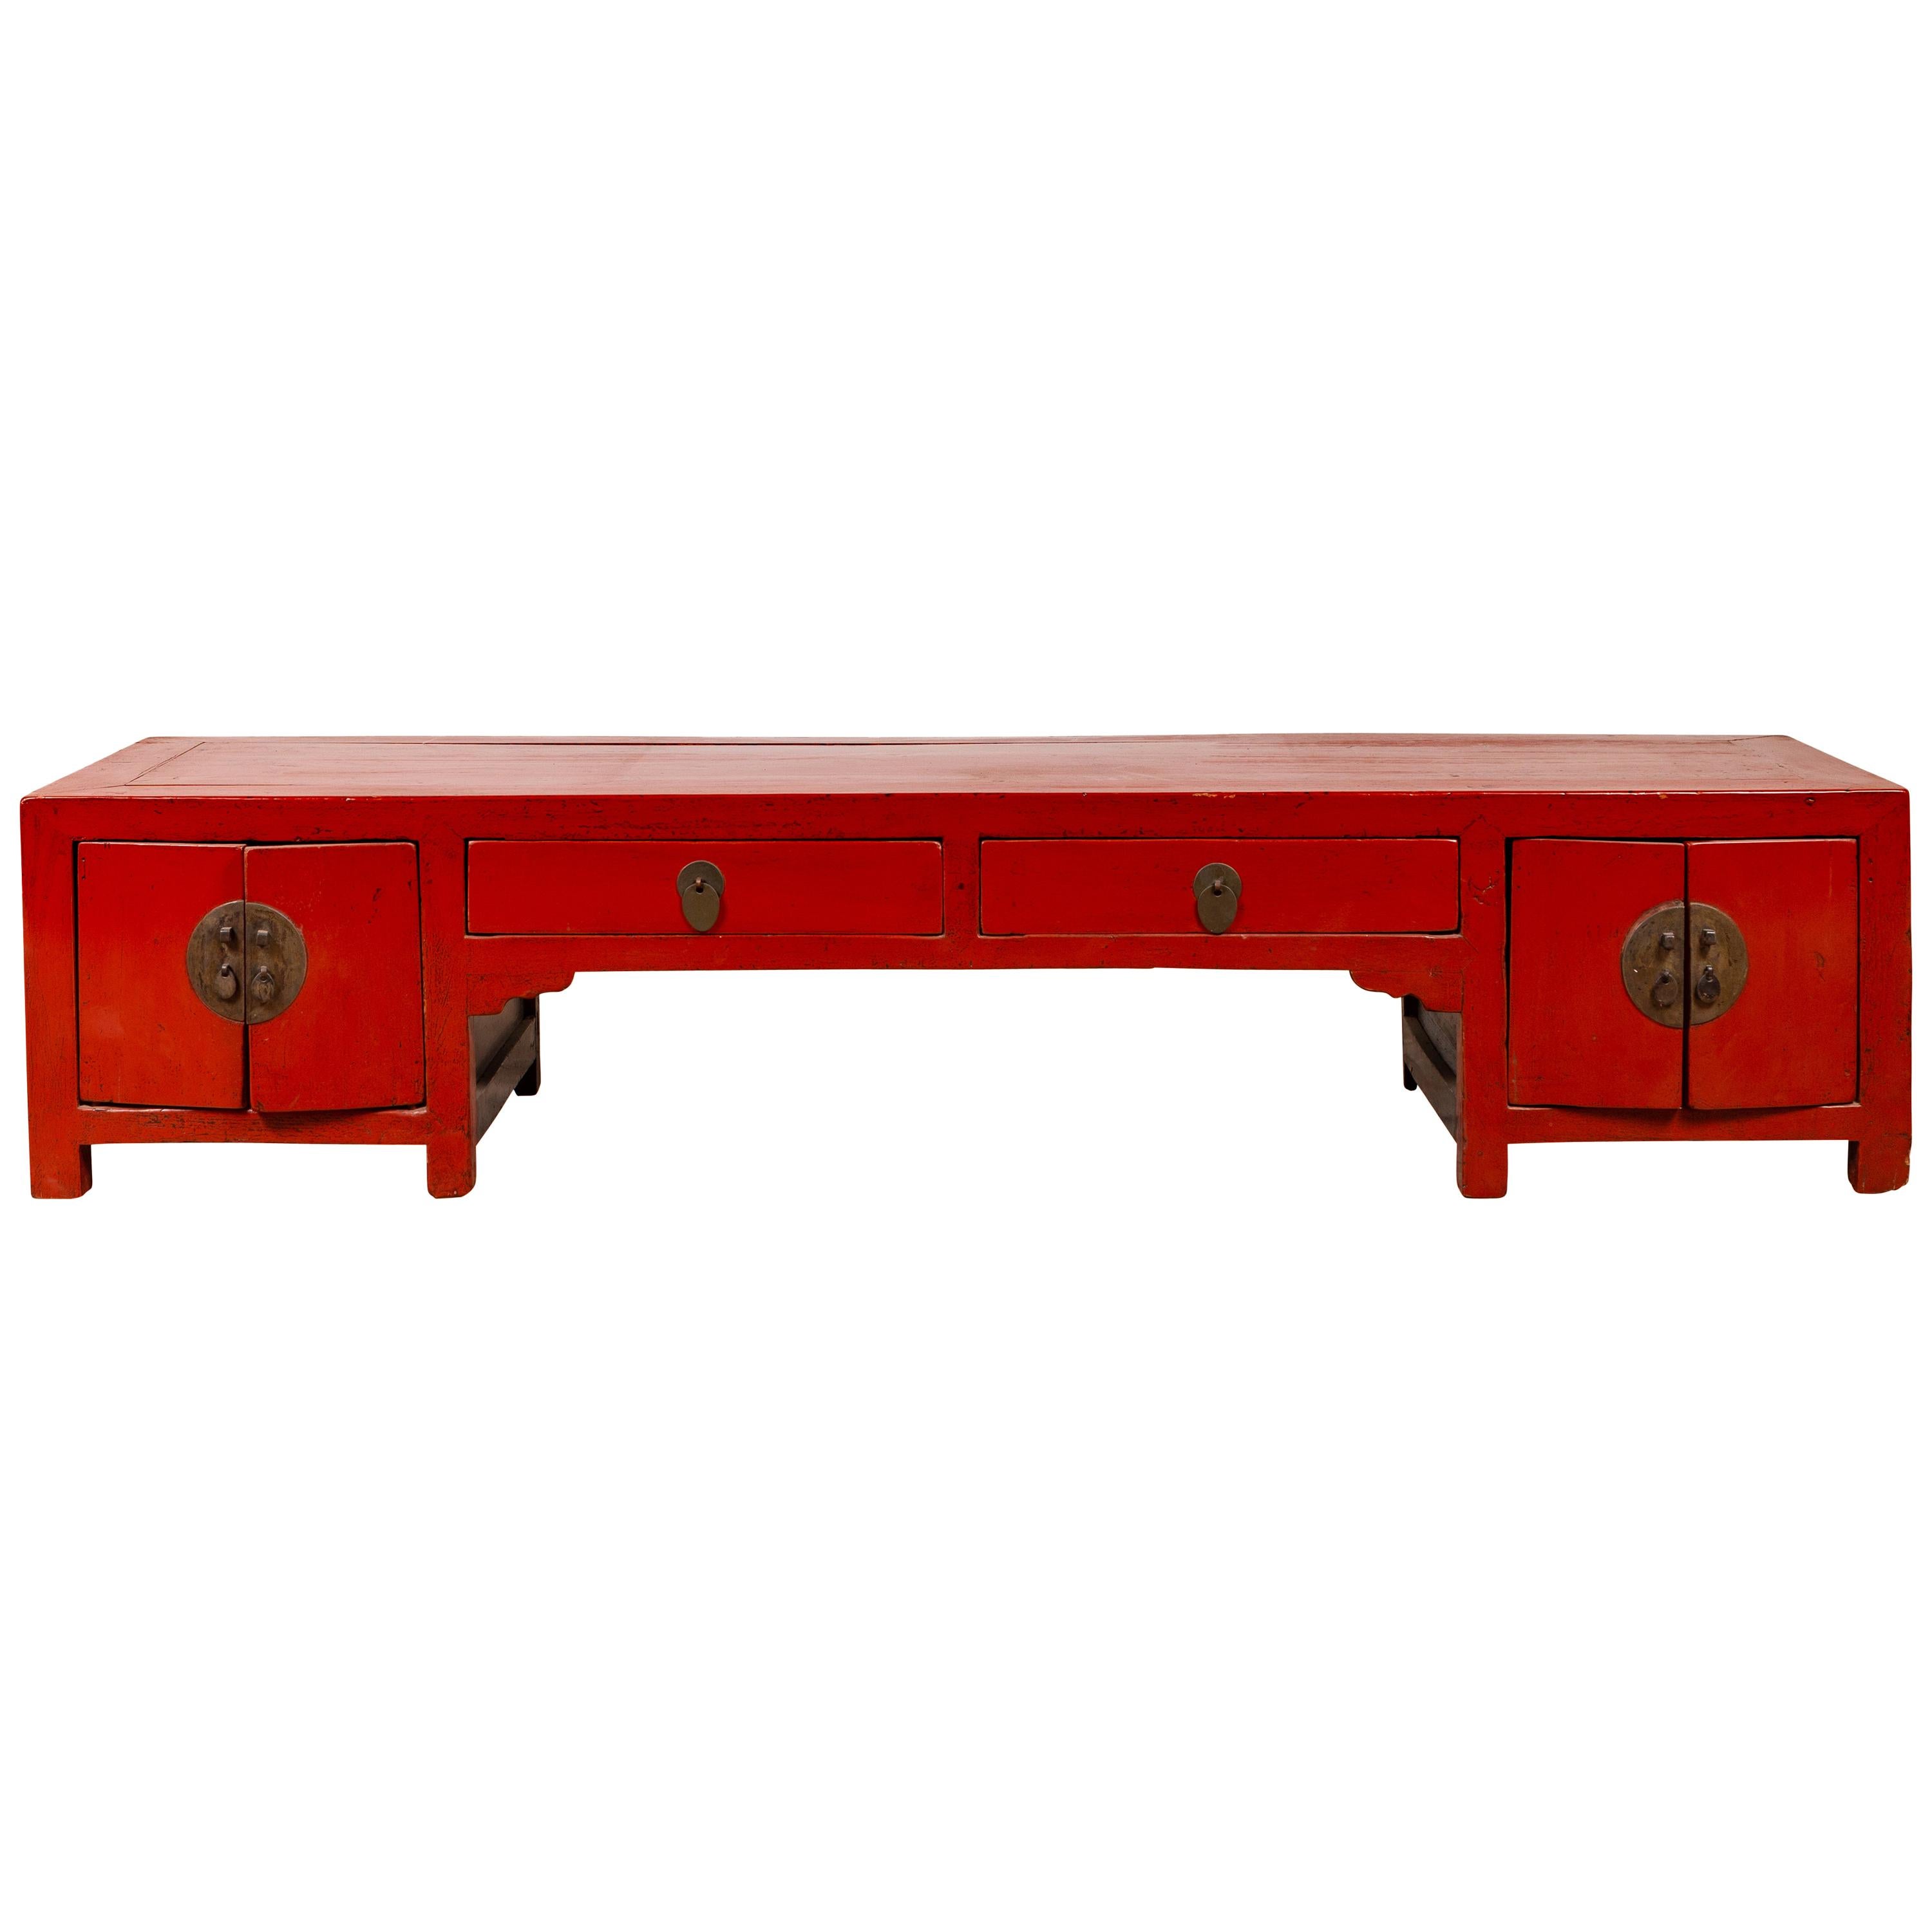 Antique Chinese Ming Style Red Lacquered Low Kang Cabinet with Doors and Drawers